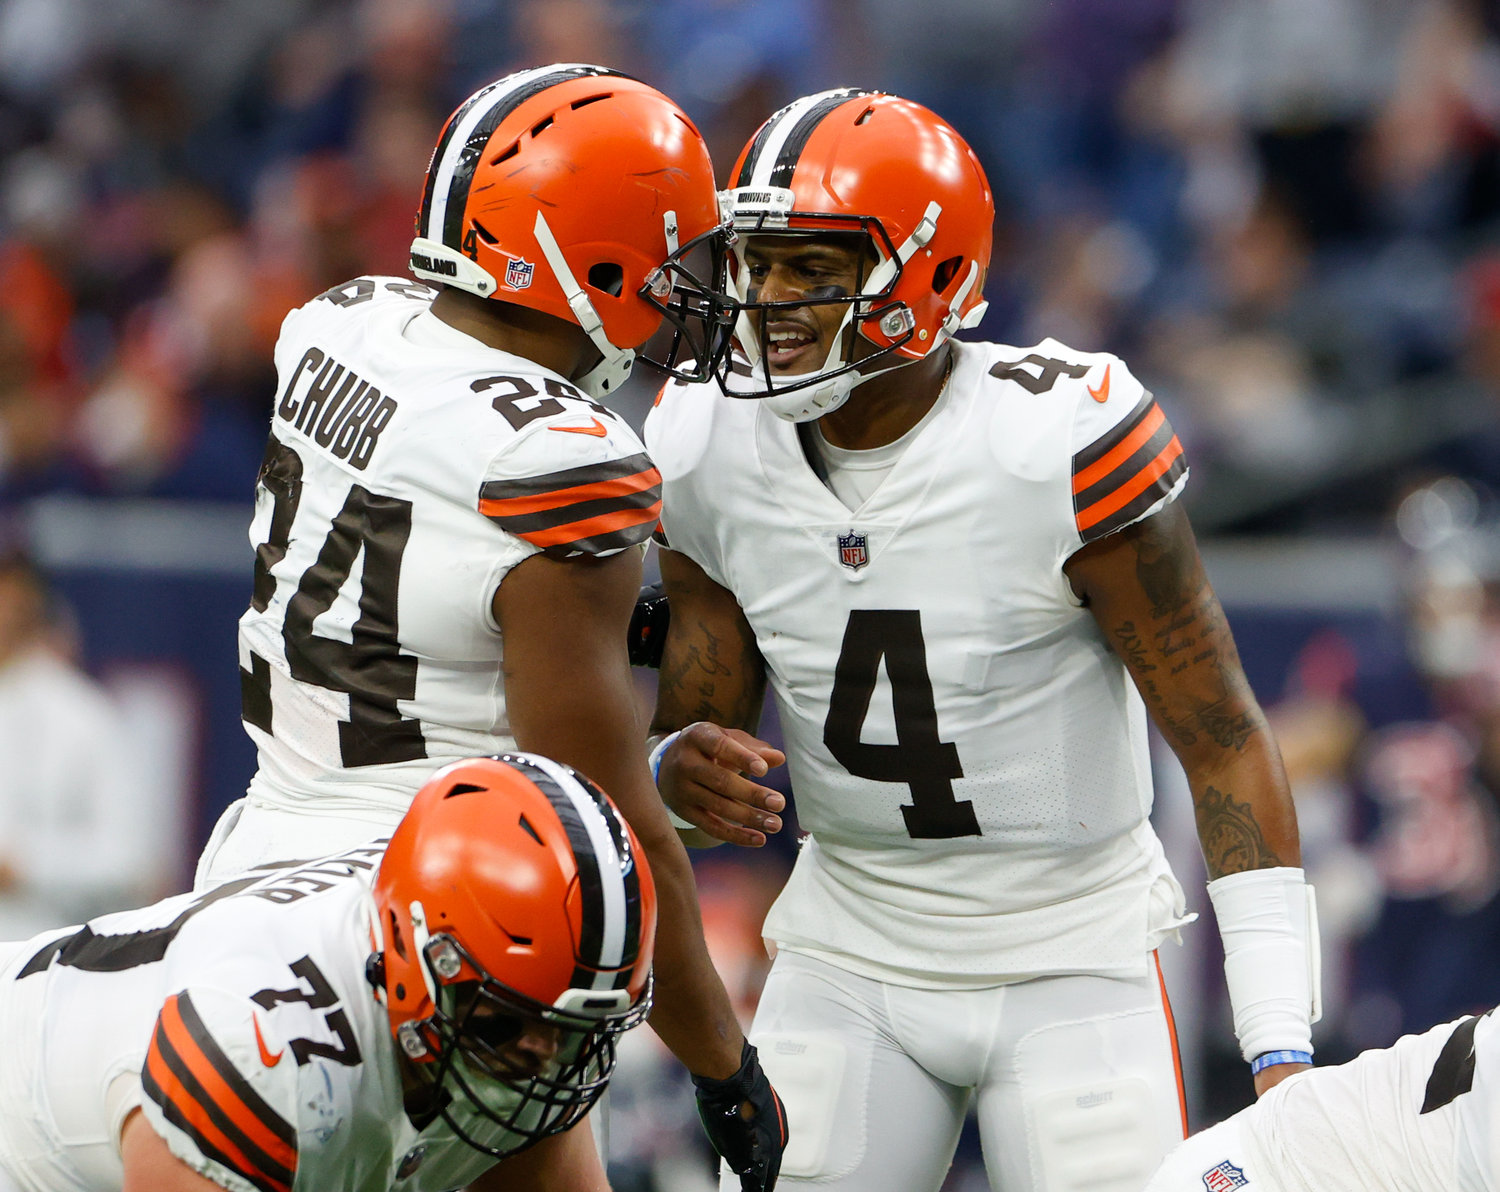 Cleveland Browns quarterback Deshaun Watson (4) talks with running back Nick Chubb (24) to change a play before the snap during an NFL game between the Houston Texans and the Cleveland Browns on Dec. 4, 2022, in Houston. The Browns won, 27-14.